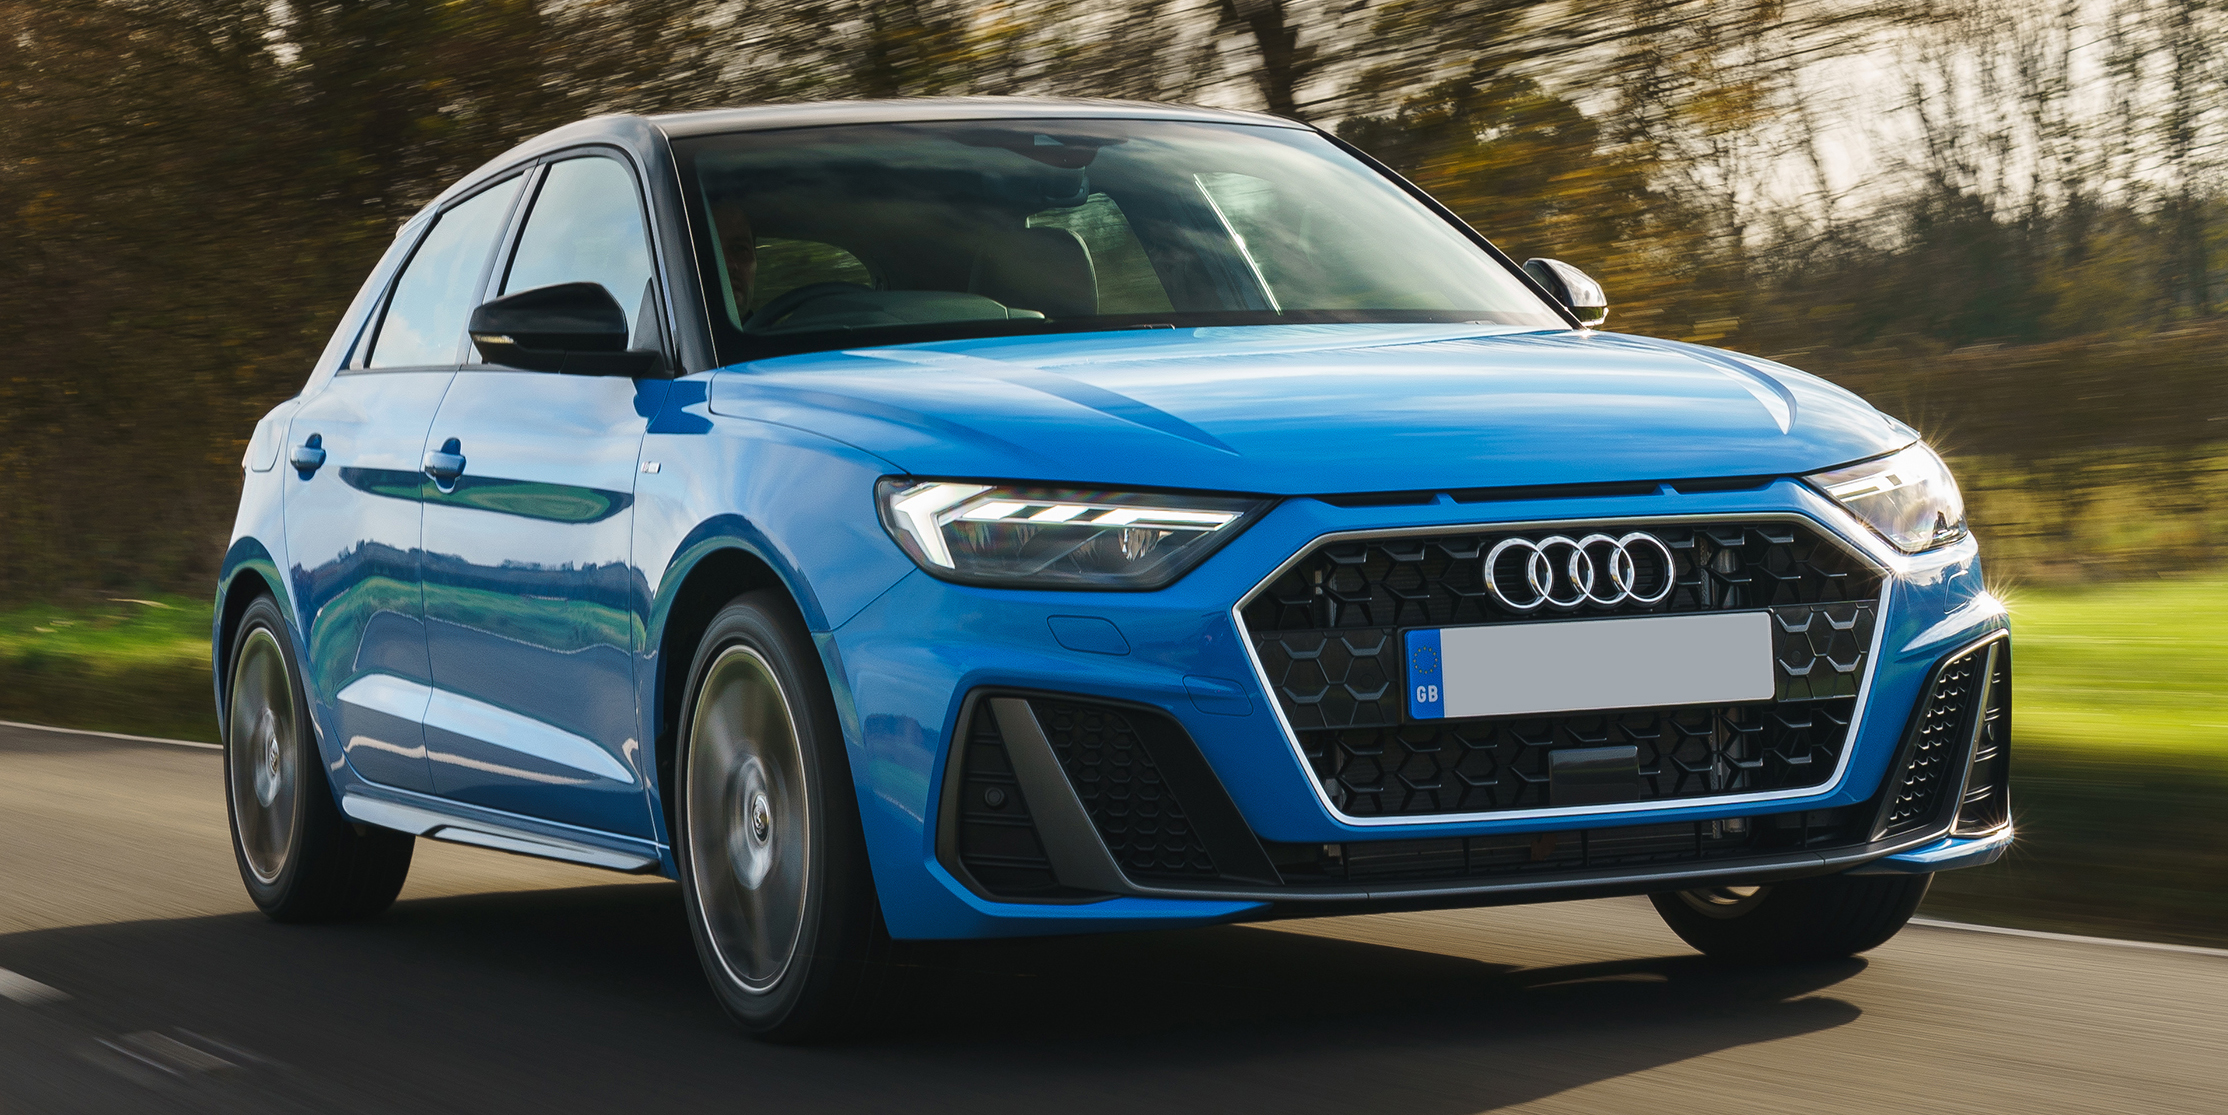 Audi A1 Sportback Review & Prices